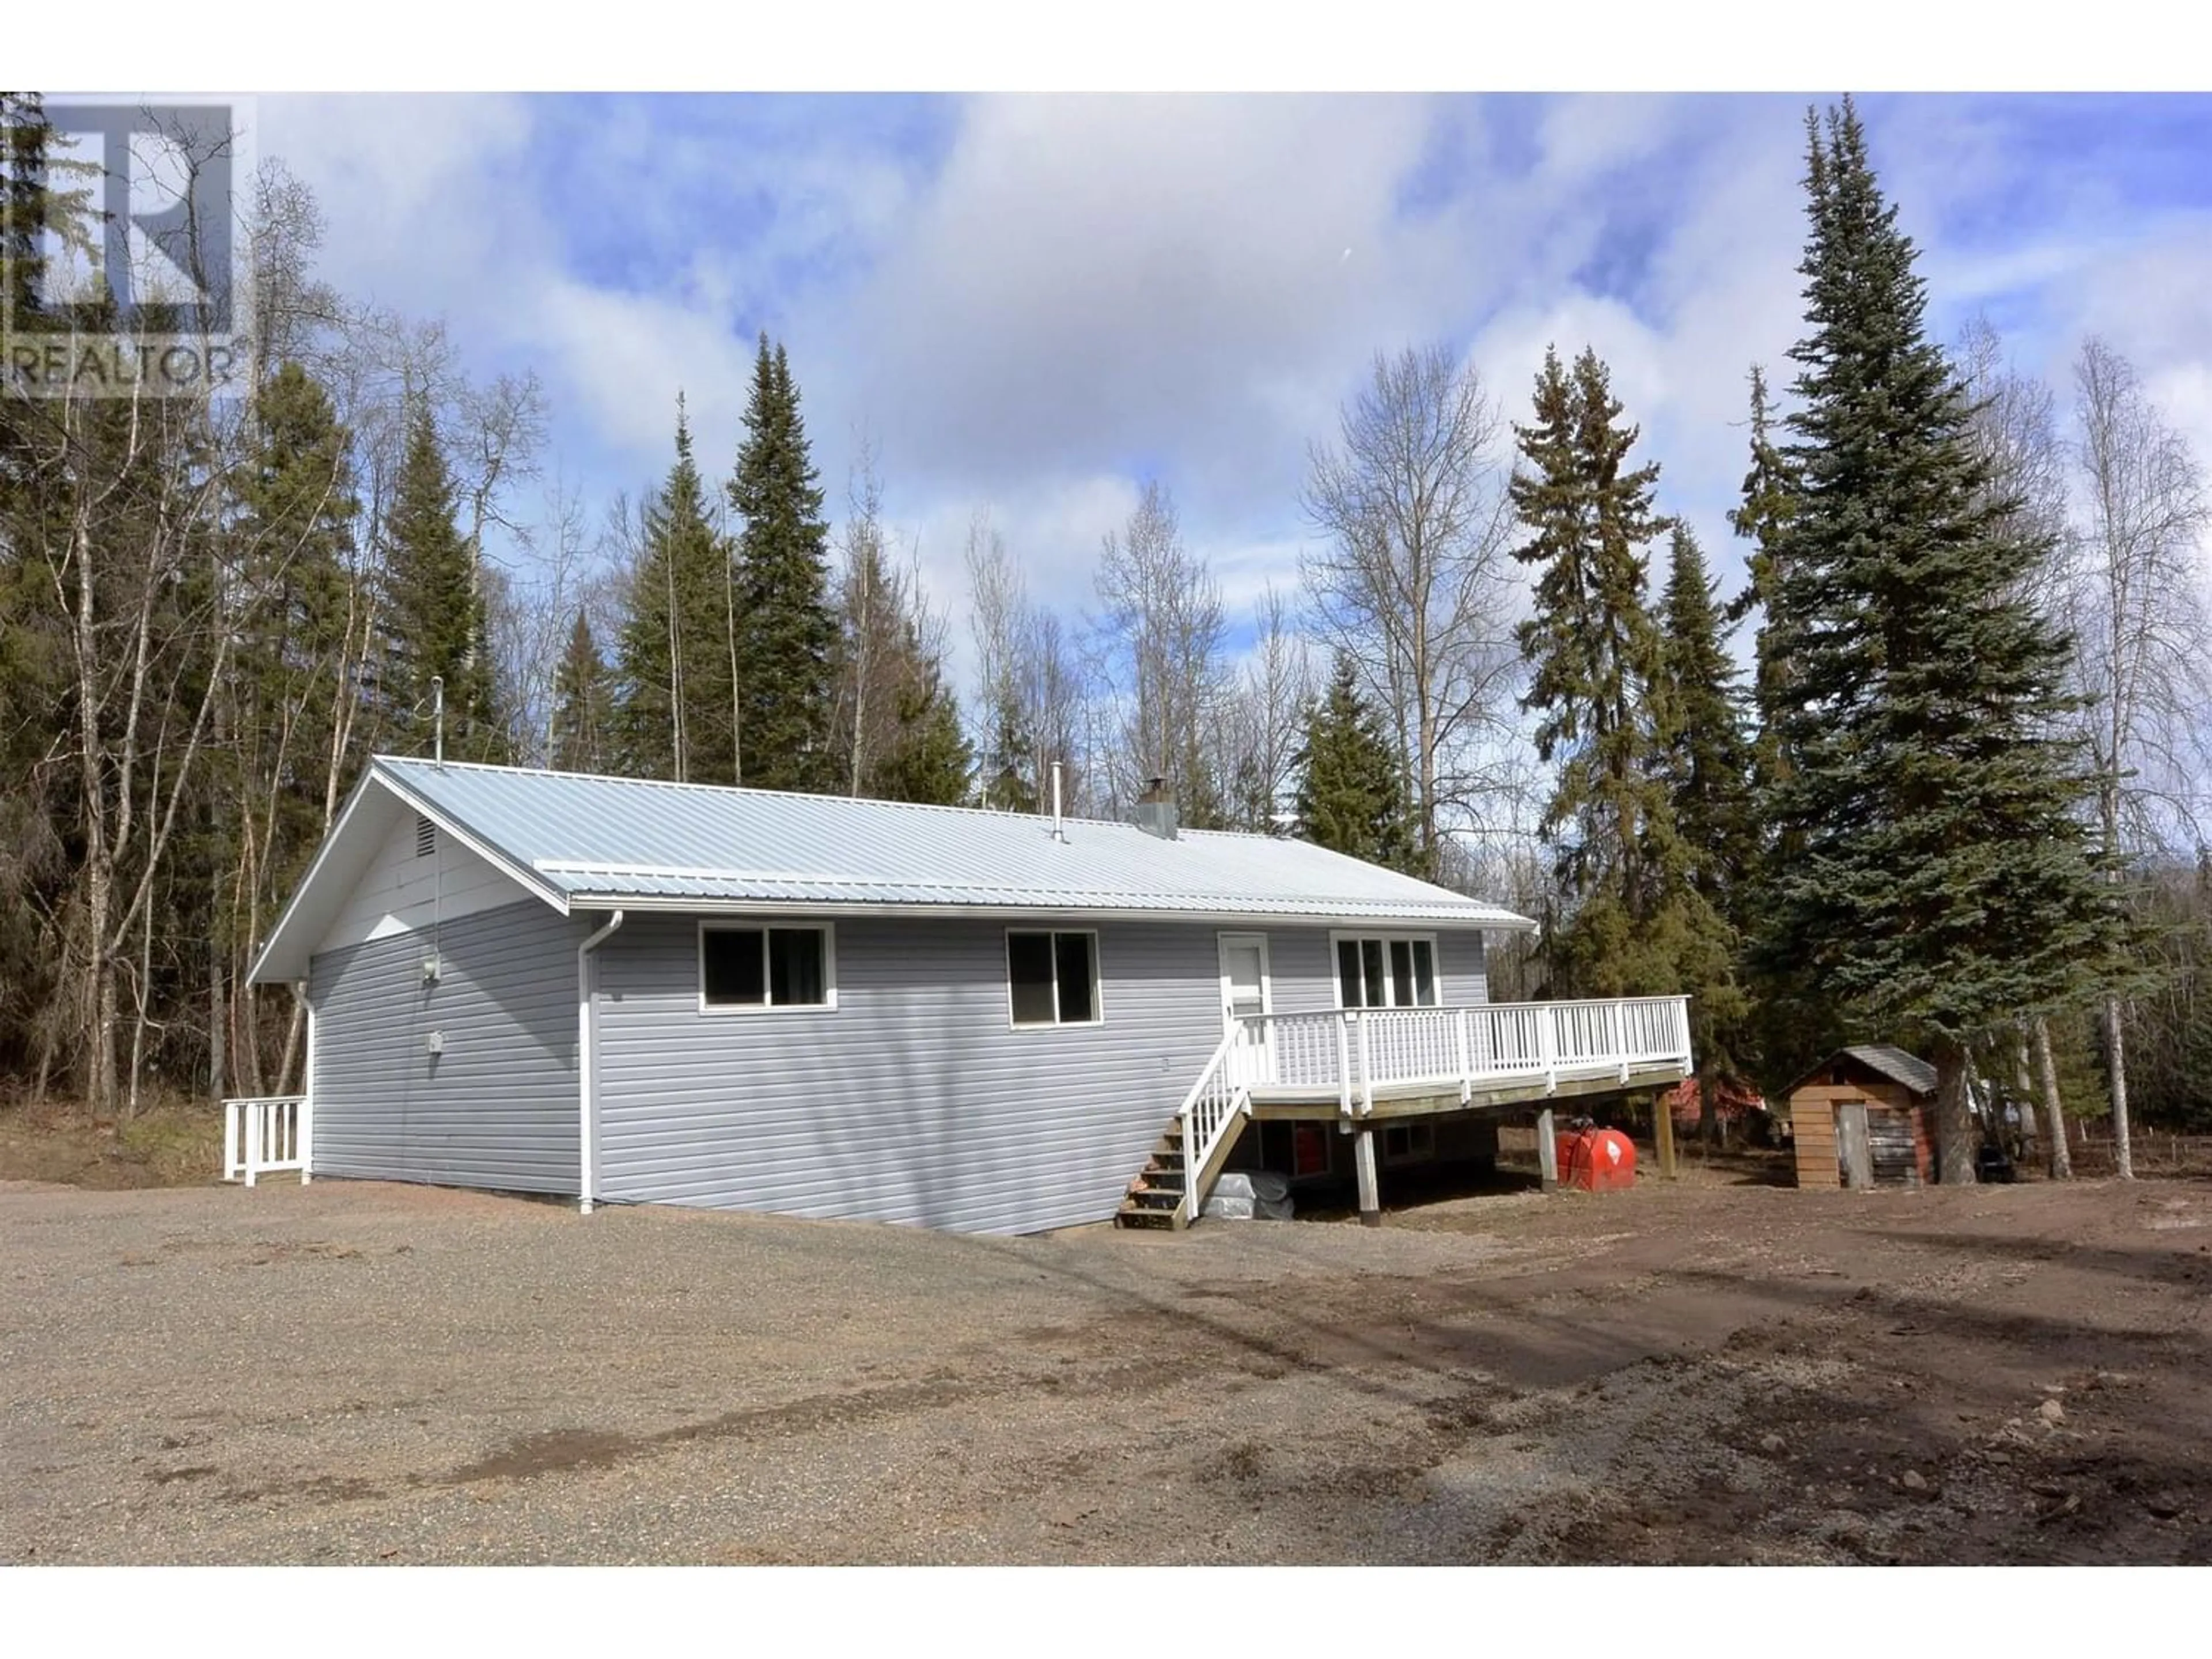 Outside view for 13236 DUNLOP STREET, Smithers British Columbia V0J2N1